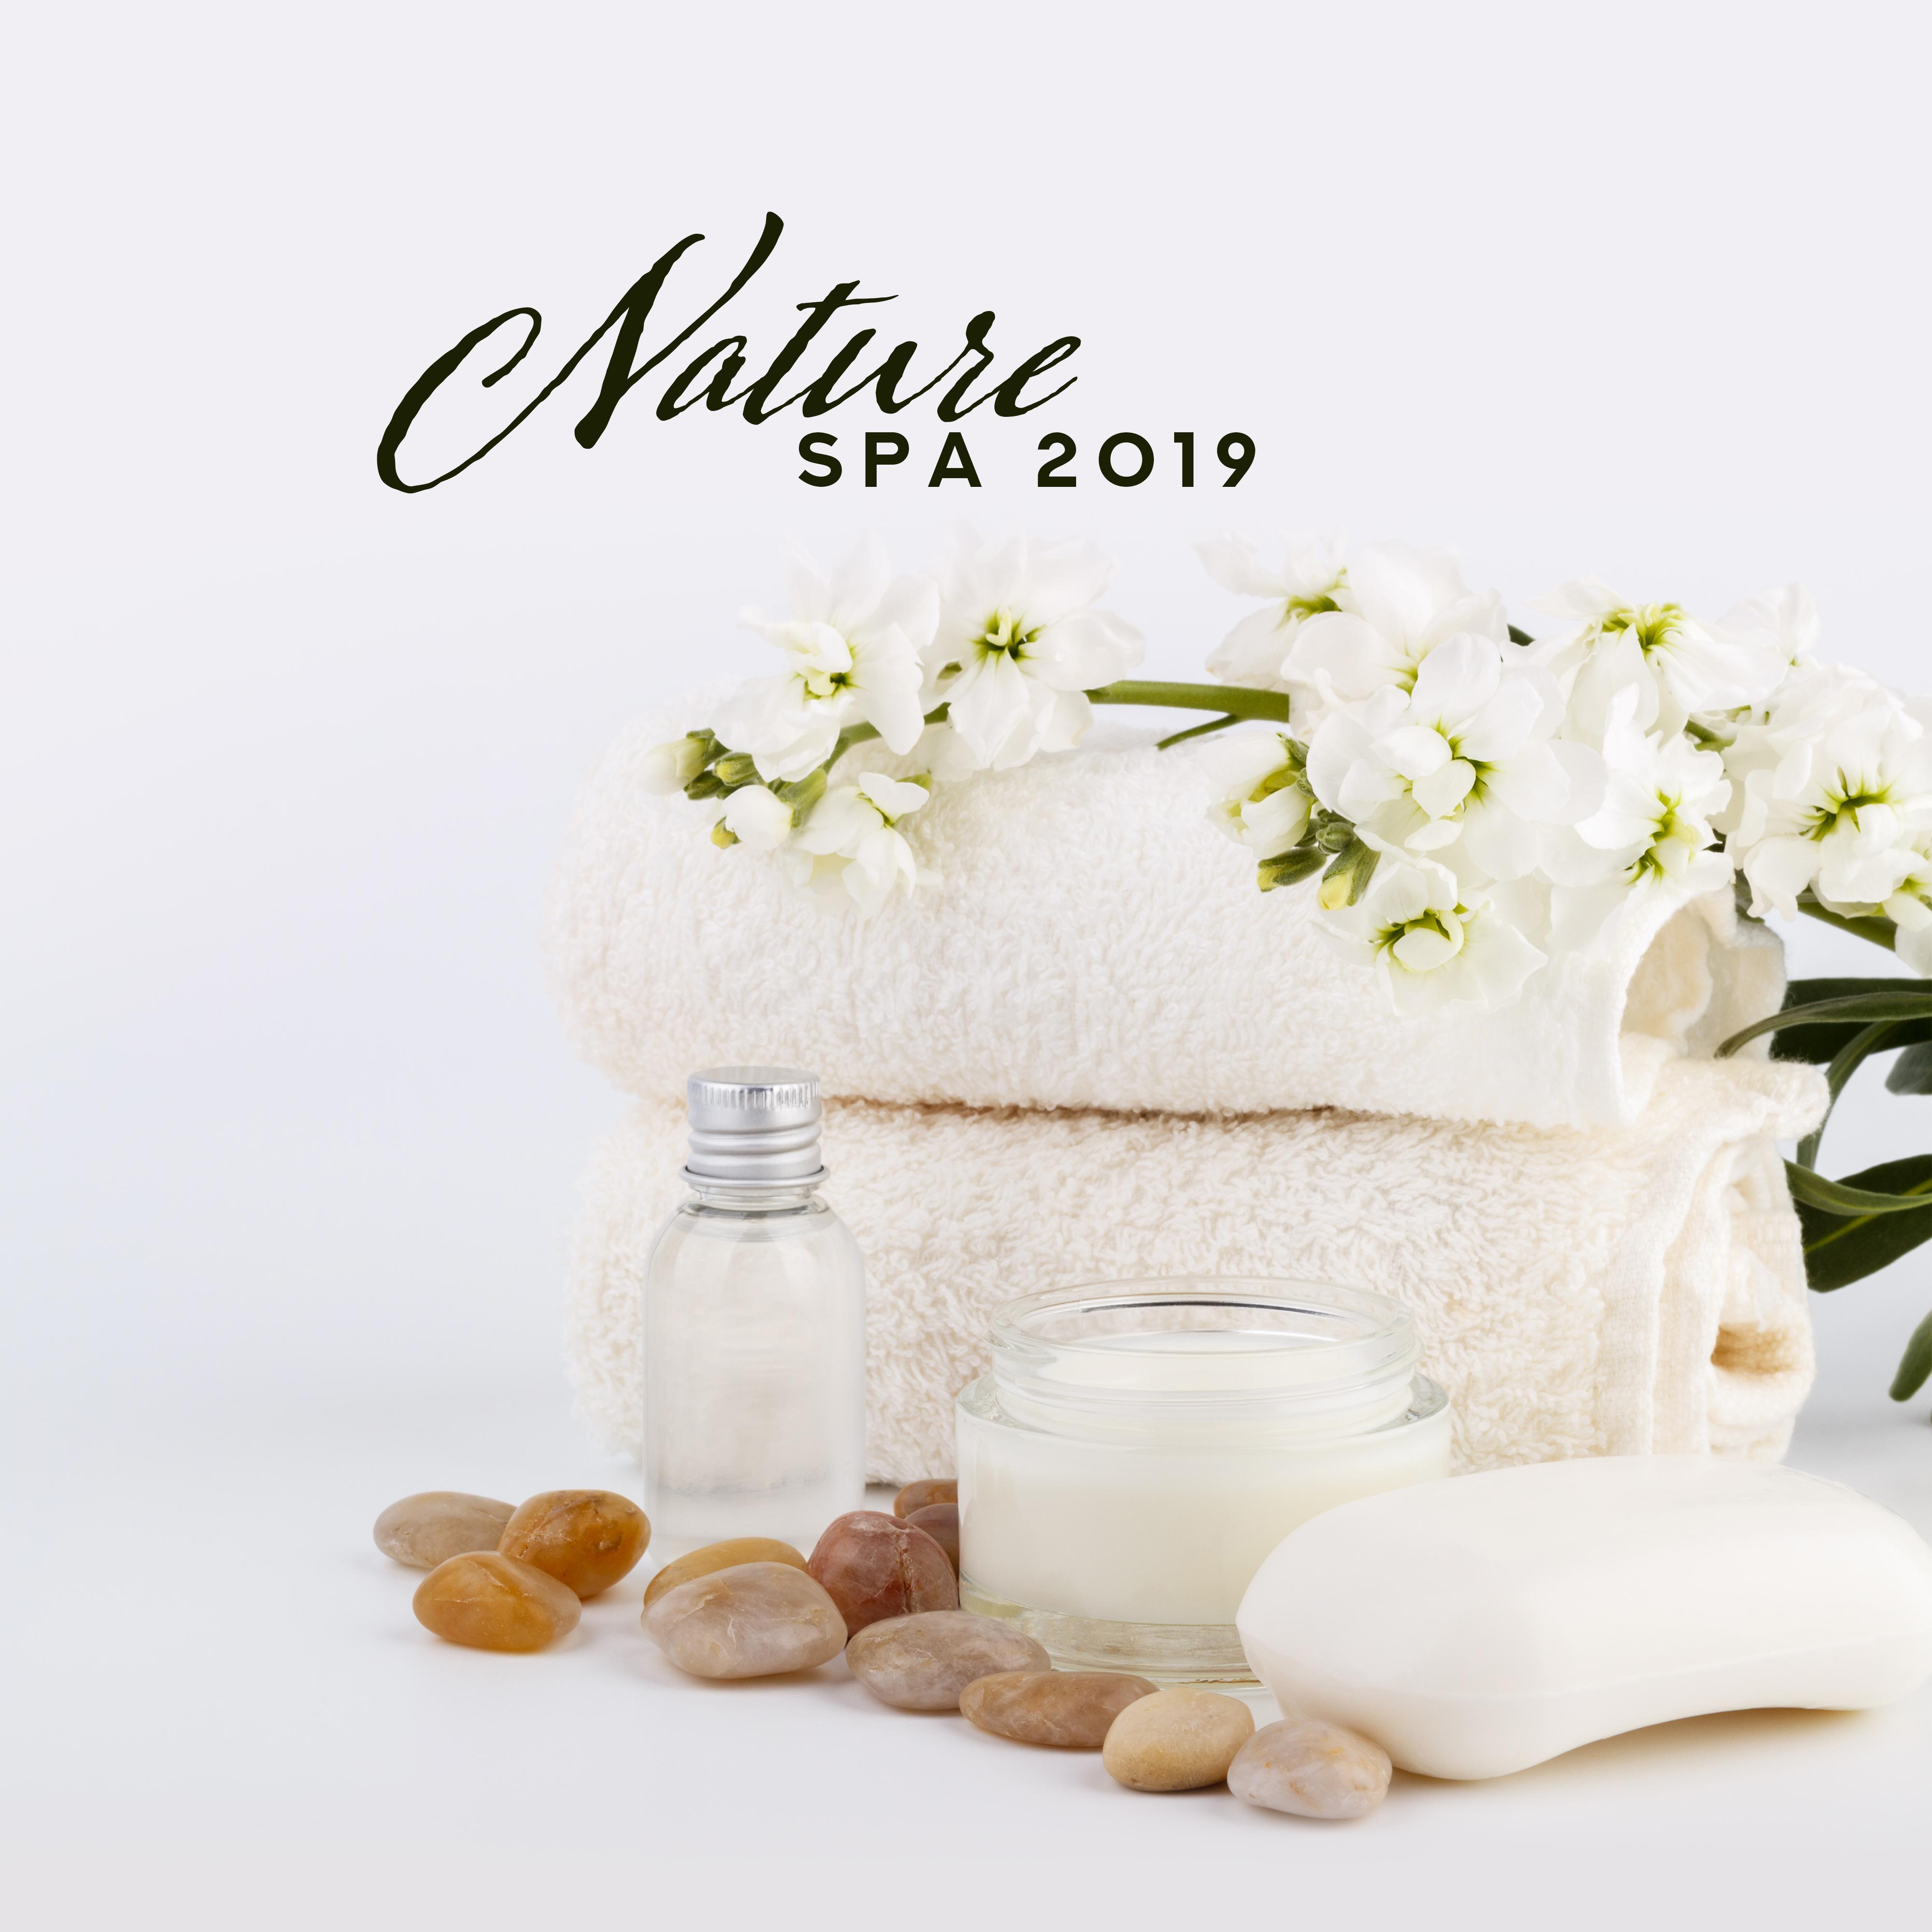 Nature Spa 2019: Top New Age Nature Music for Spa Salon, Total Relax Experience, Songs Perfect for Wellness, Massage Session, Aromatherapy, Sauna, Sounds of Water, Forest, Animals & More